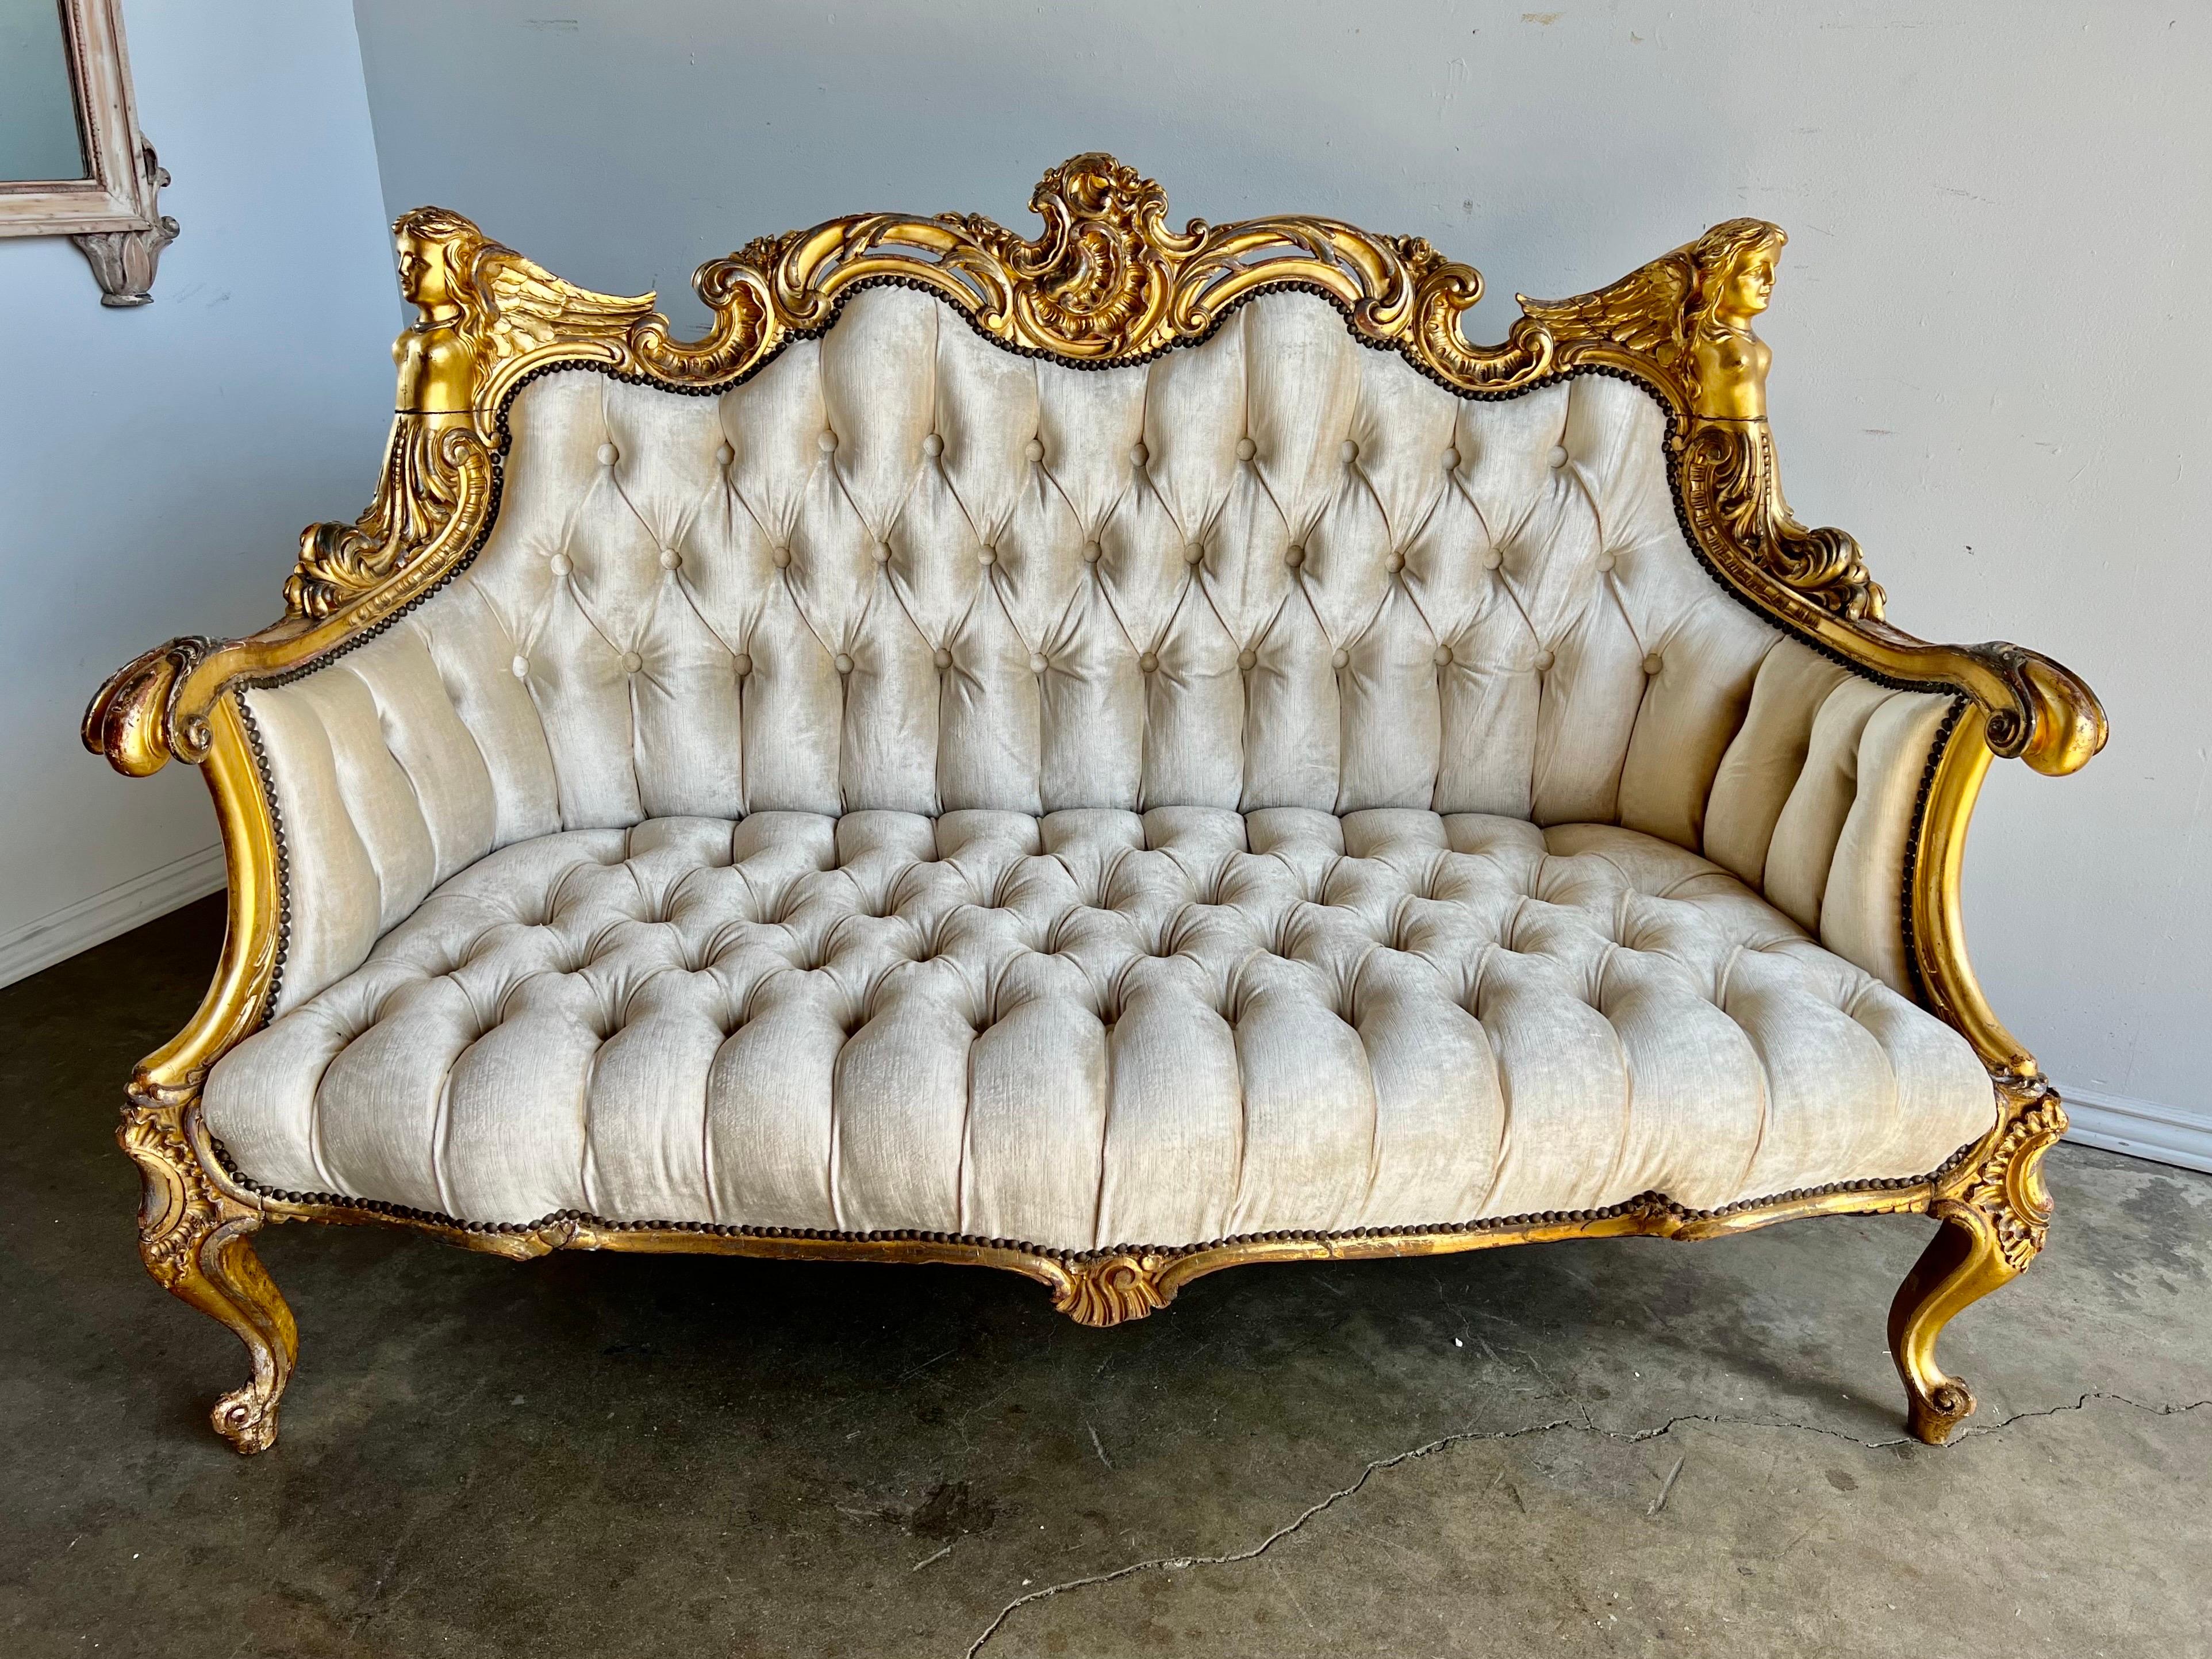 19th Century French Louis XiV style gilt wood settee depicting carved wood angels, flowers, cartouches, acanthus leaves and more. The settee is newly upholstered in a cream velvet with nailhead trim.